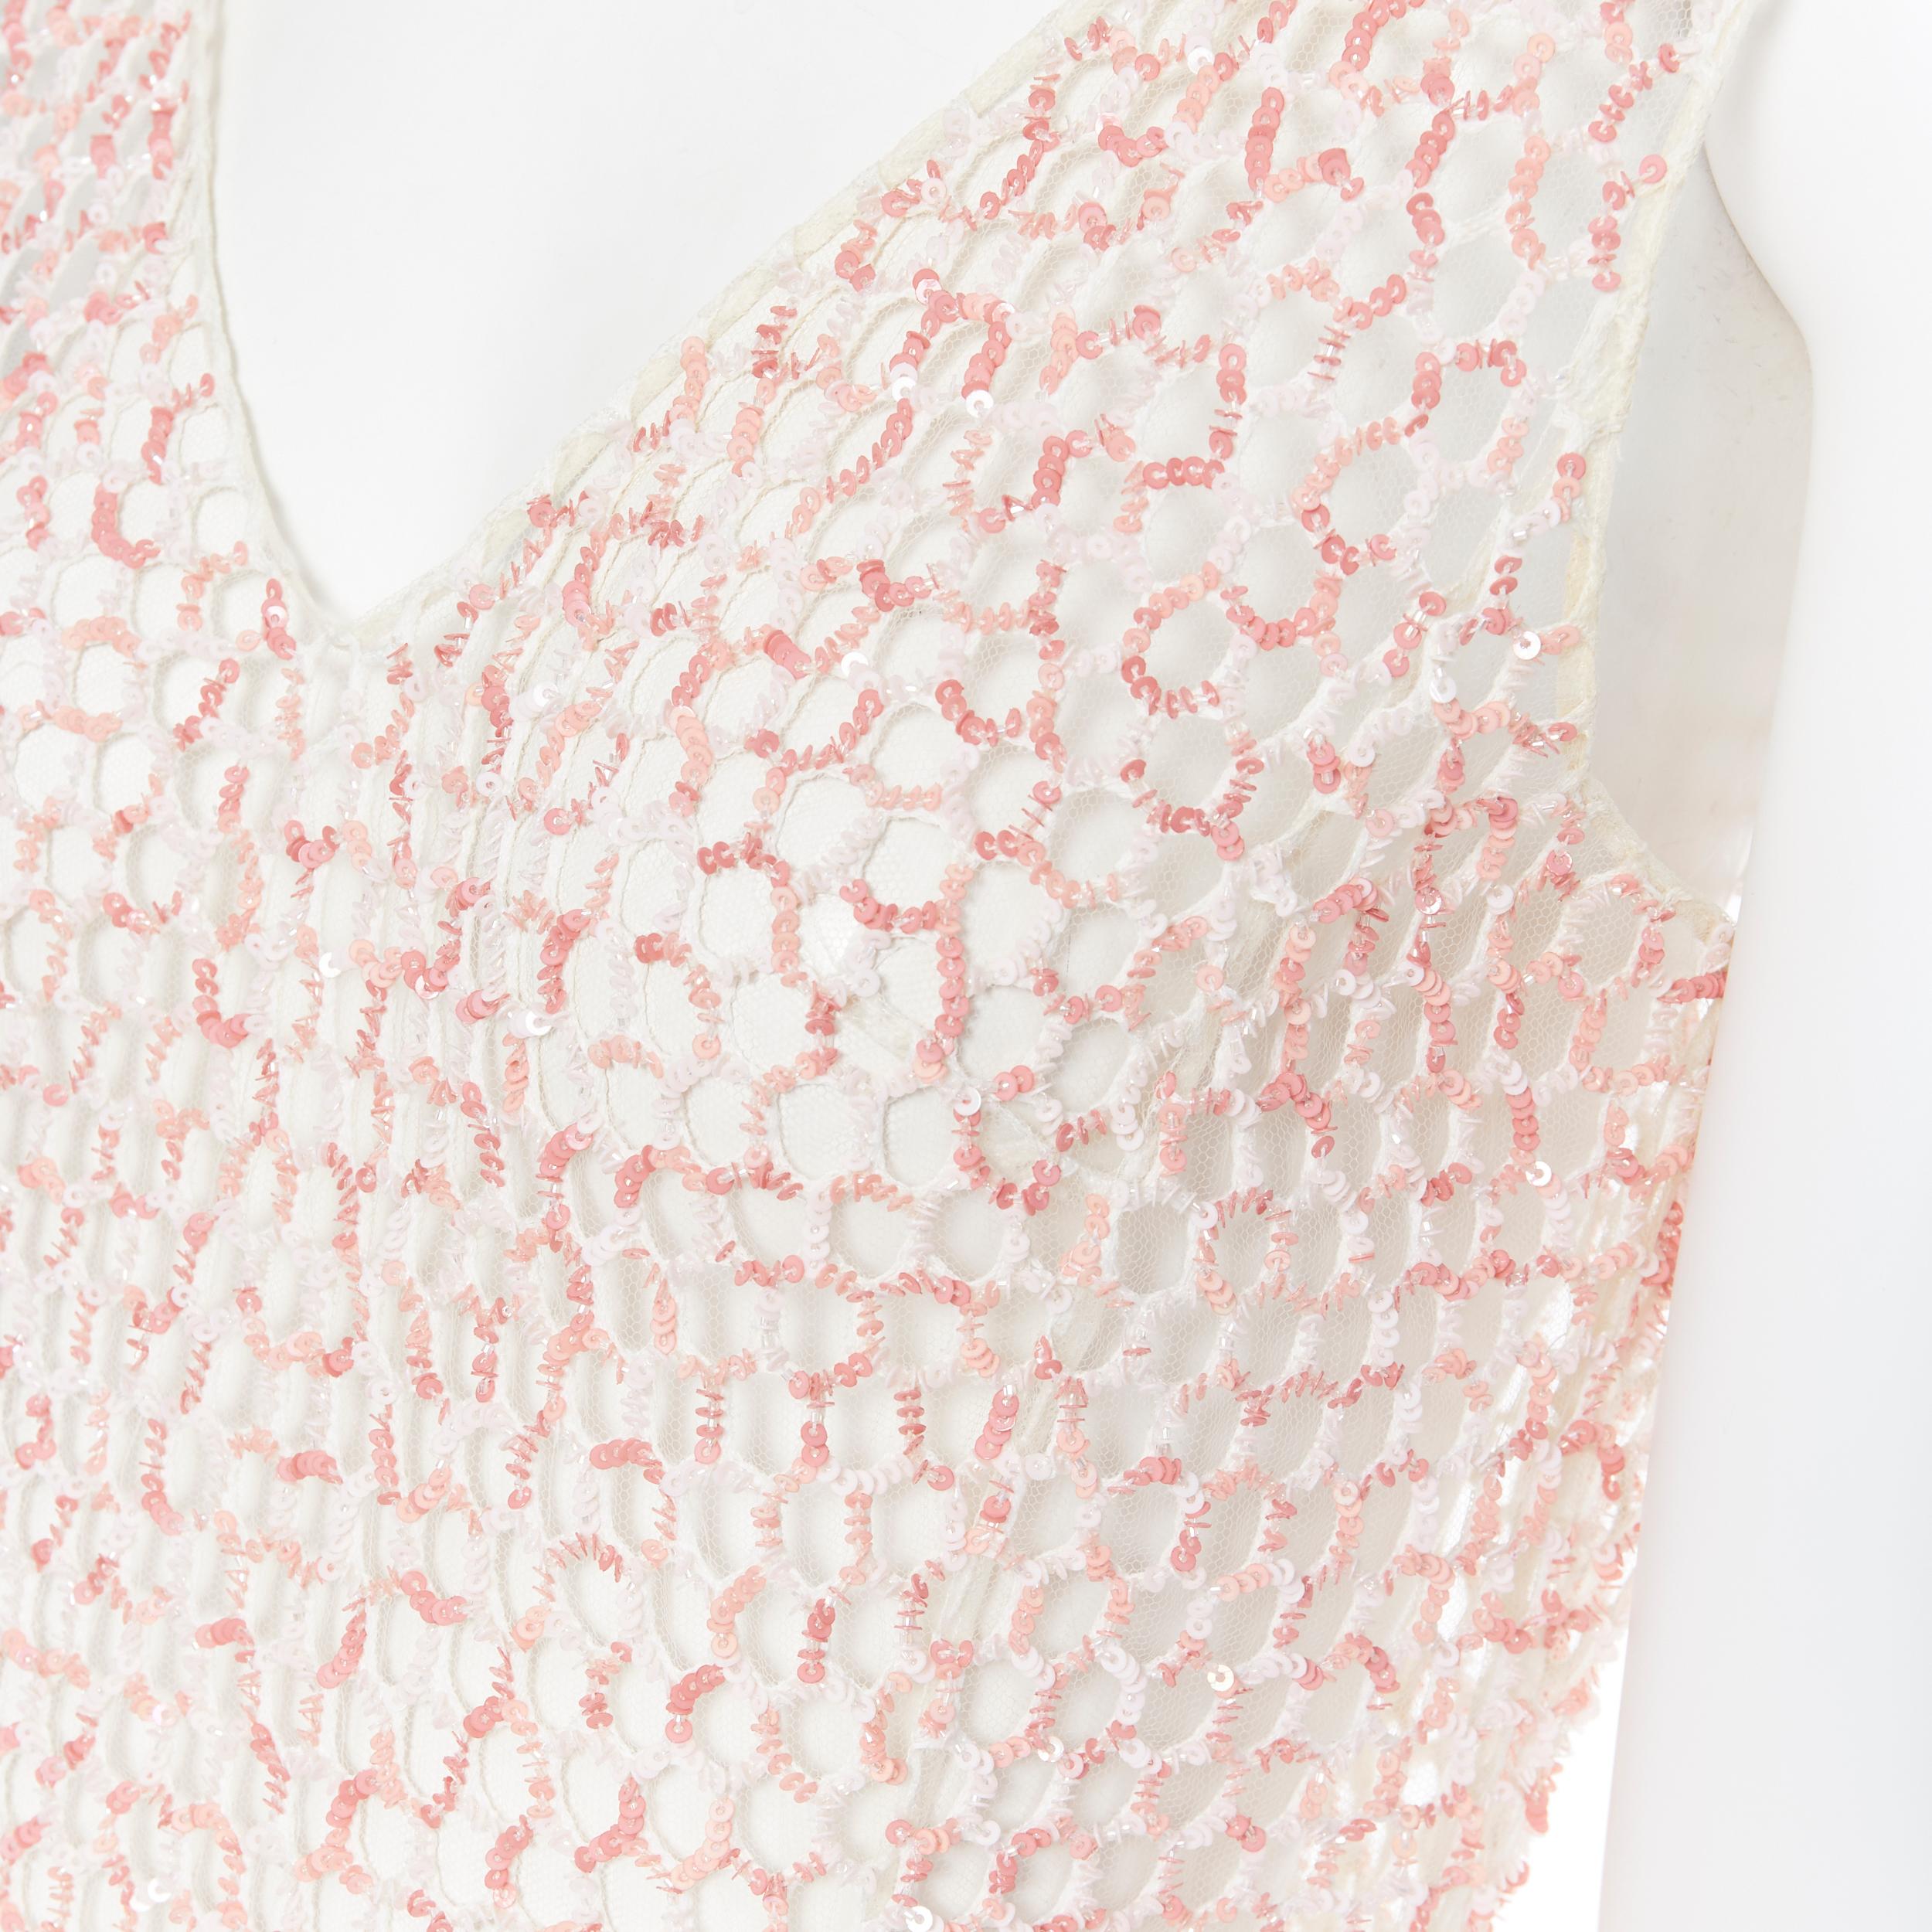 CHRISTIAN DIOR pink sequins bead embroidered sheer mesh fit flared over dress S
Brand: Christian Dior
Model Name / Style: Sequins sheer dress
Material: Unknown, feels like embroidery on mesh
Color: Pink
Pattern: Geometric
Closure: Zip
Extra Detail: